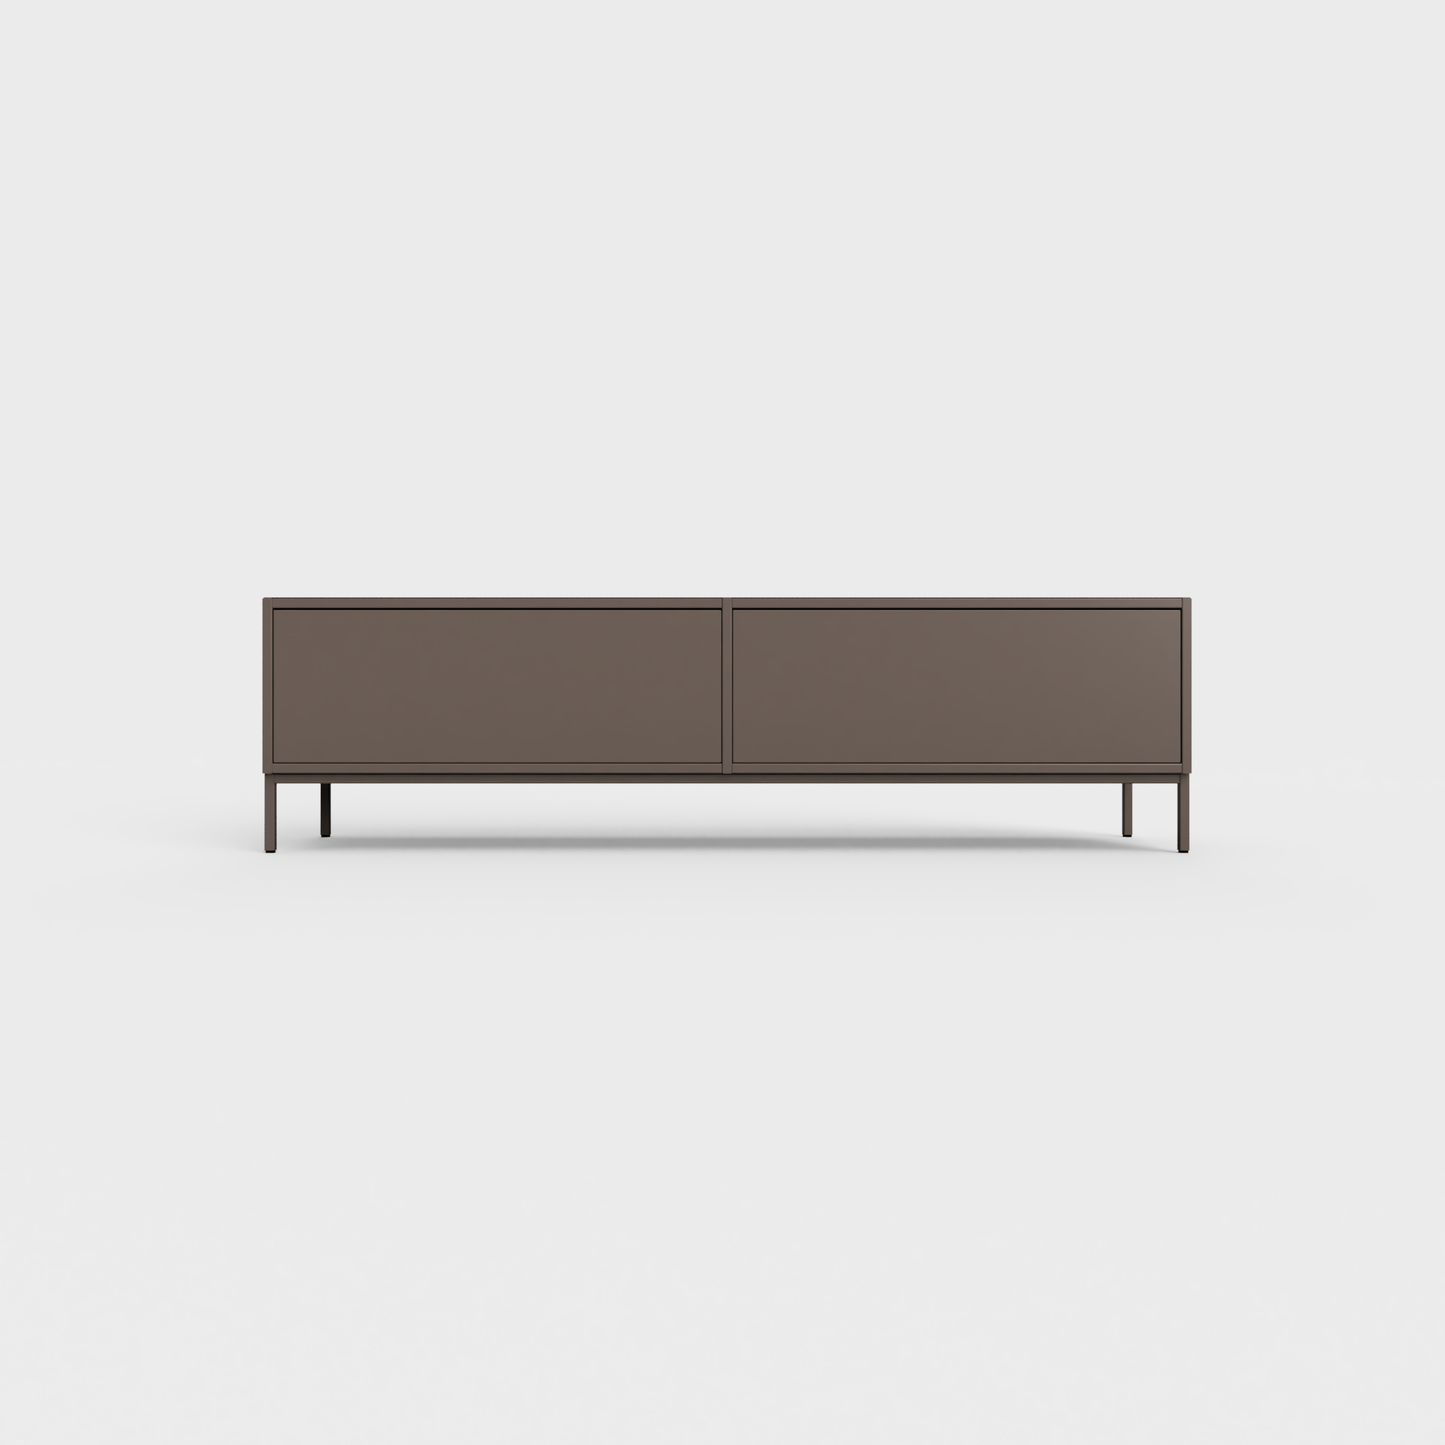 Prunus 01 Lowboard in Earth color, powder-coated steel, elegant and modern piece of furniture for your living room